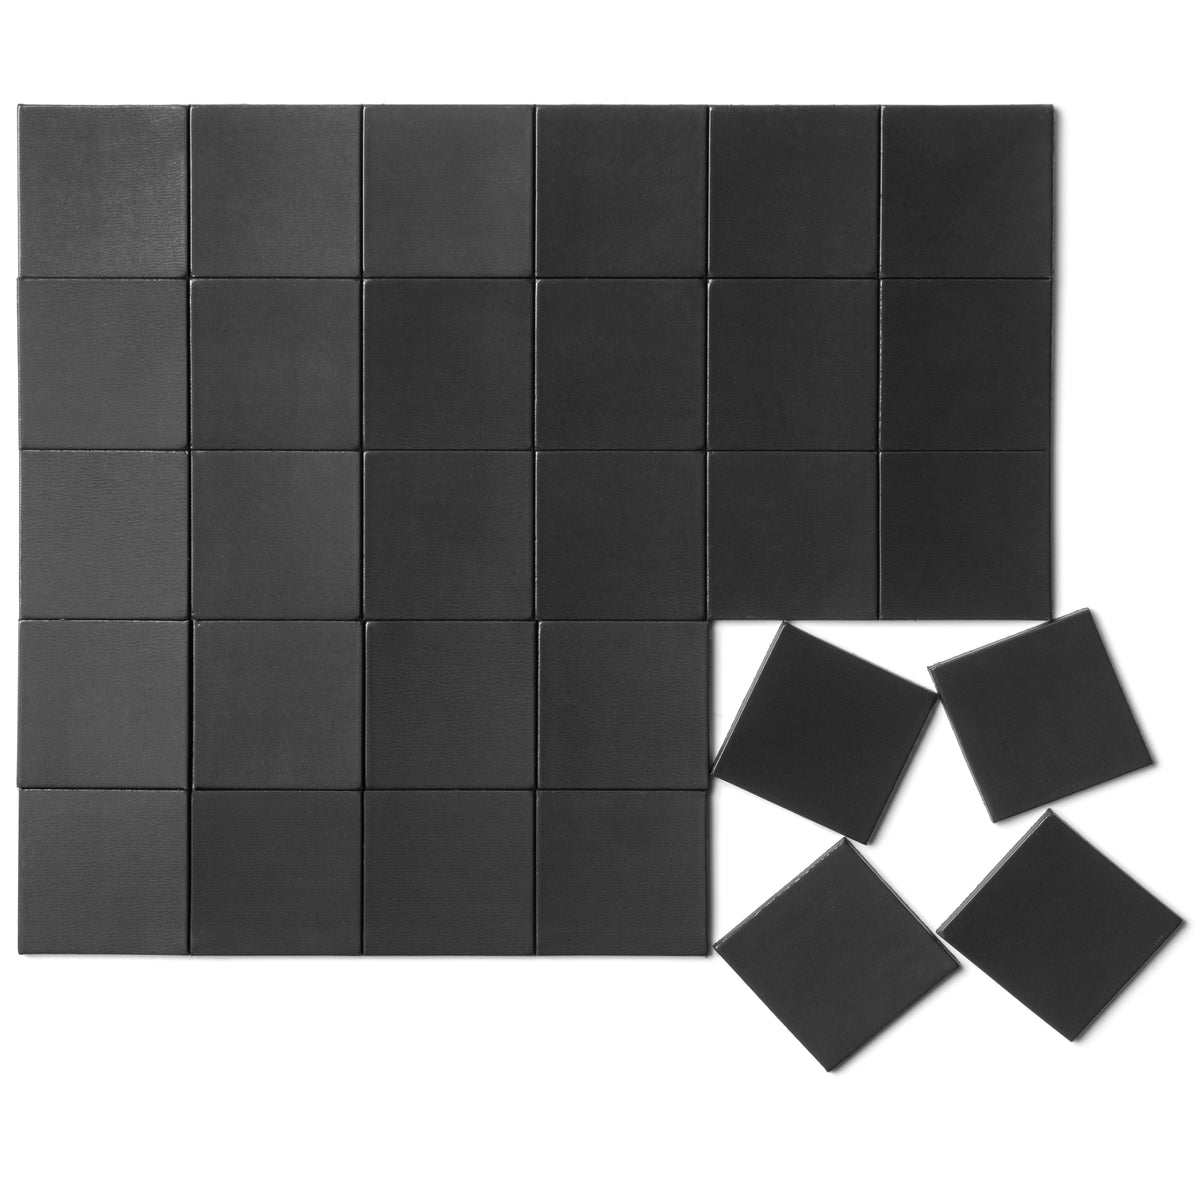 1 x 1 Square Peel & Stick Magnets, .060 Thick Self Adhesive Magnets